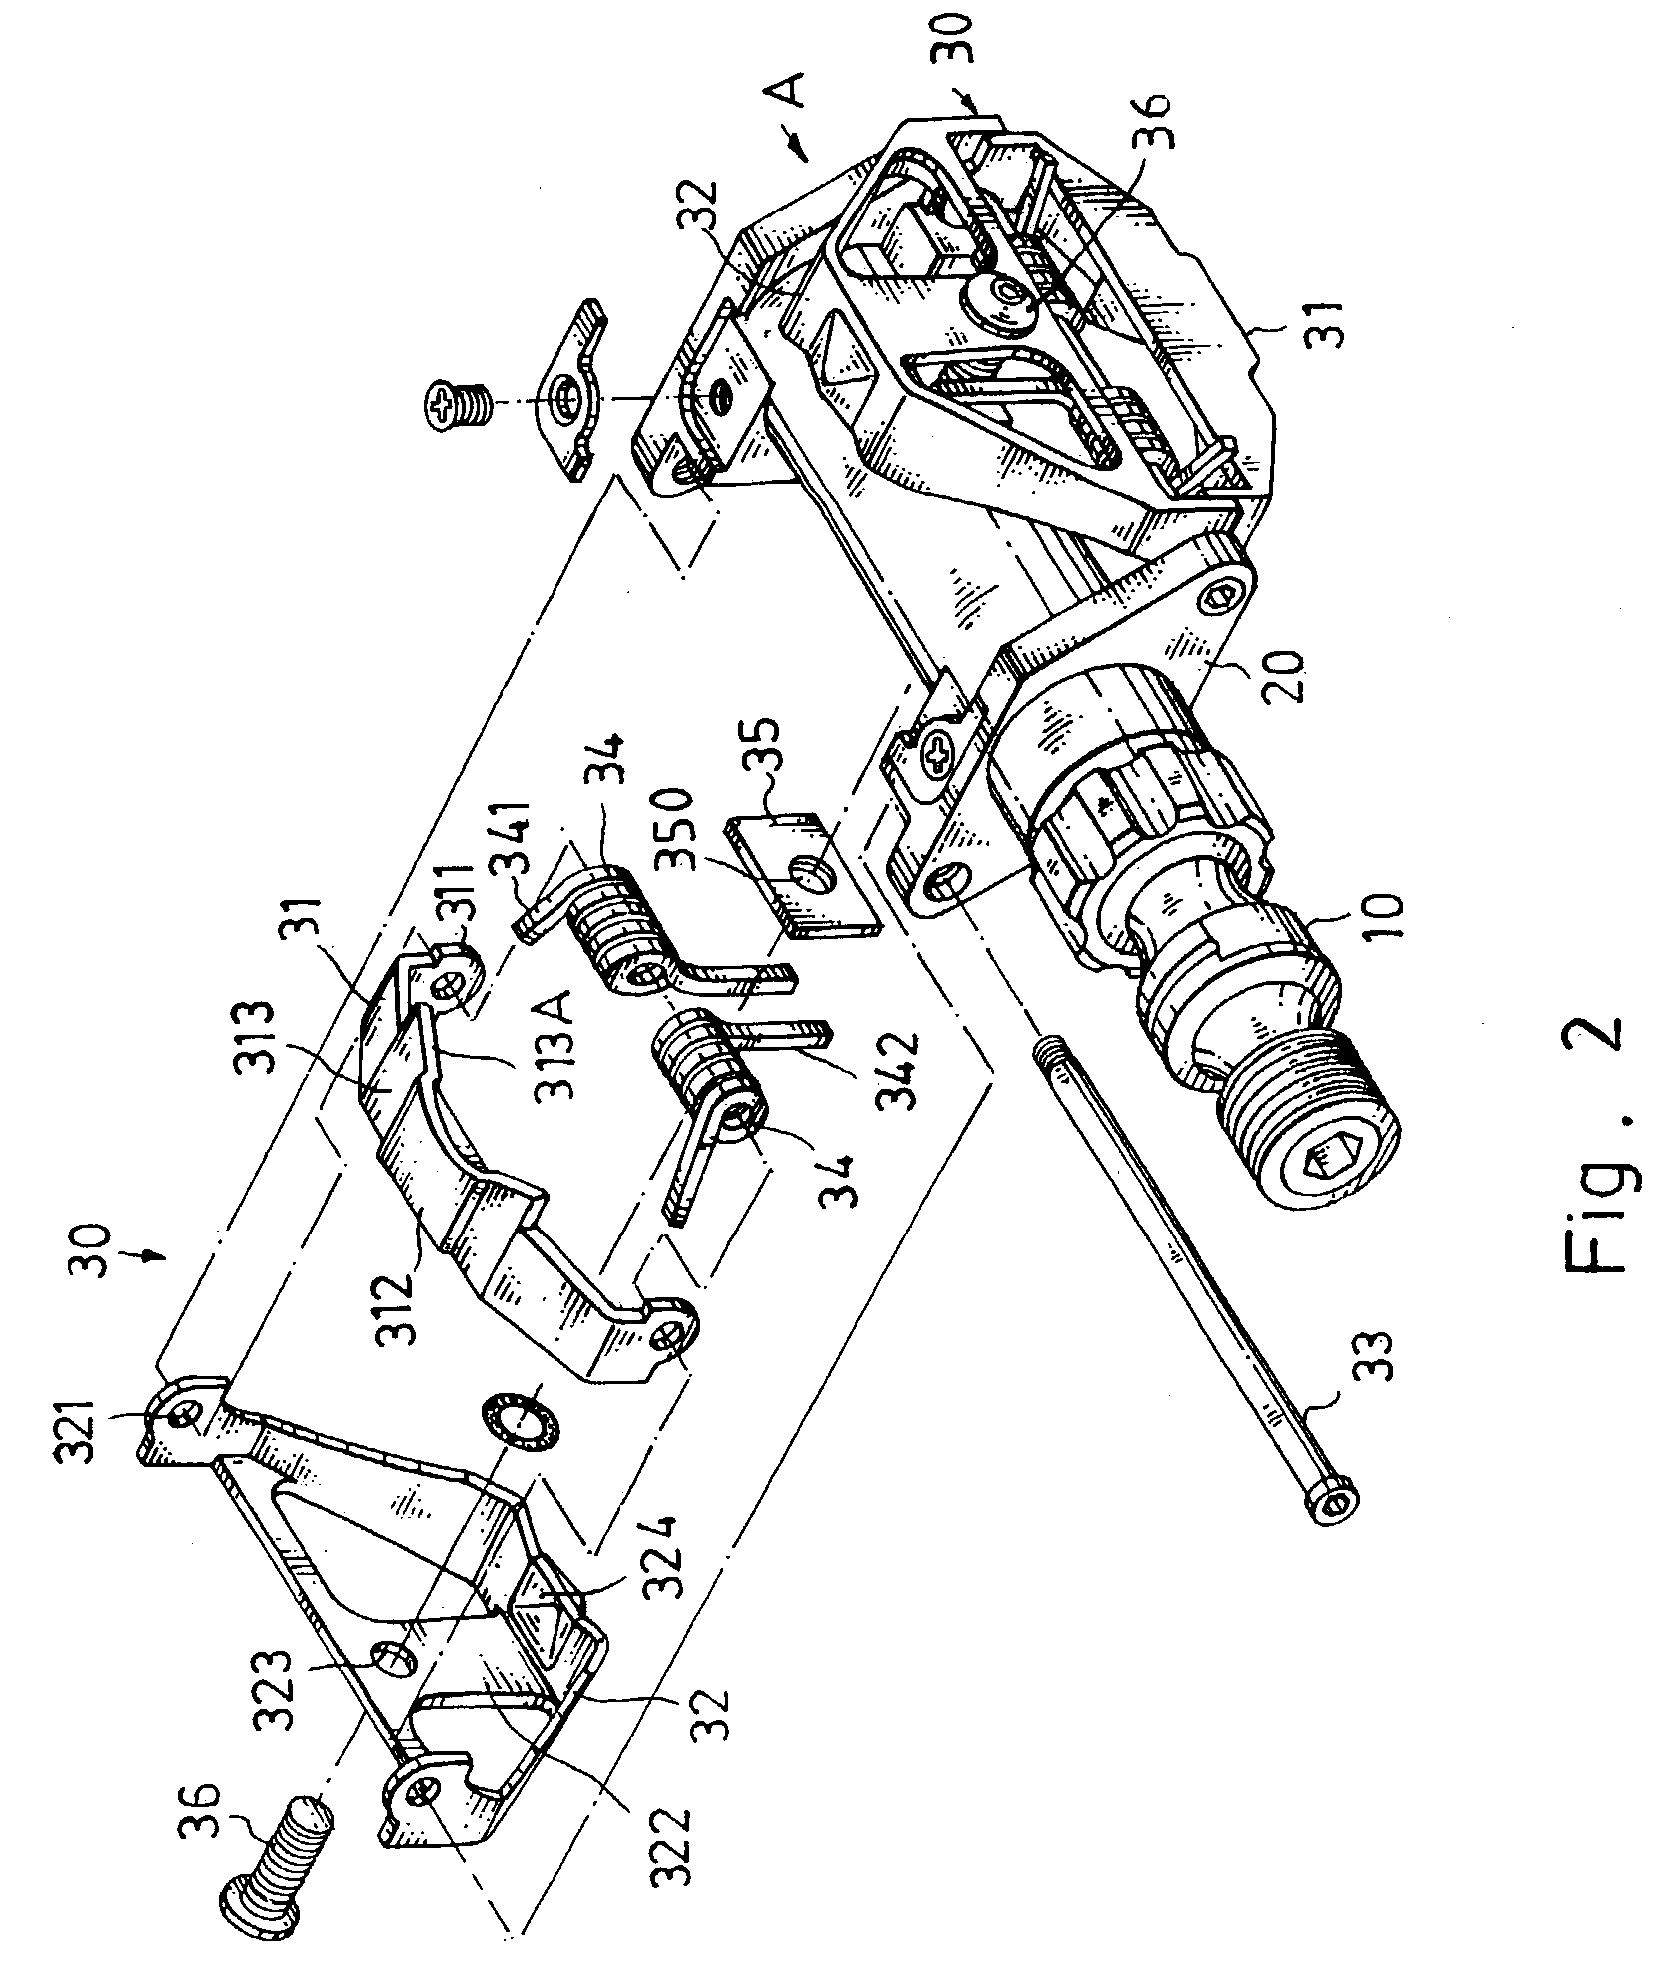 Pedal structure for a bicycle